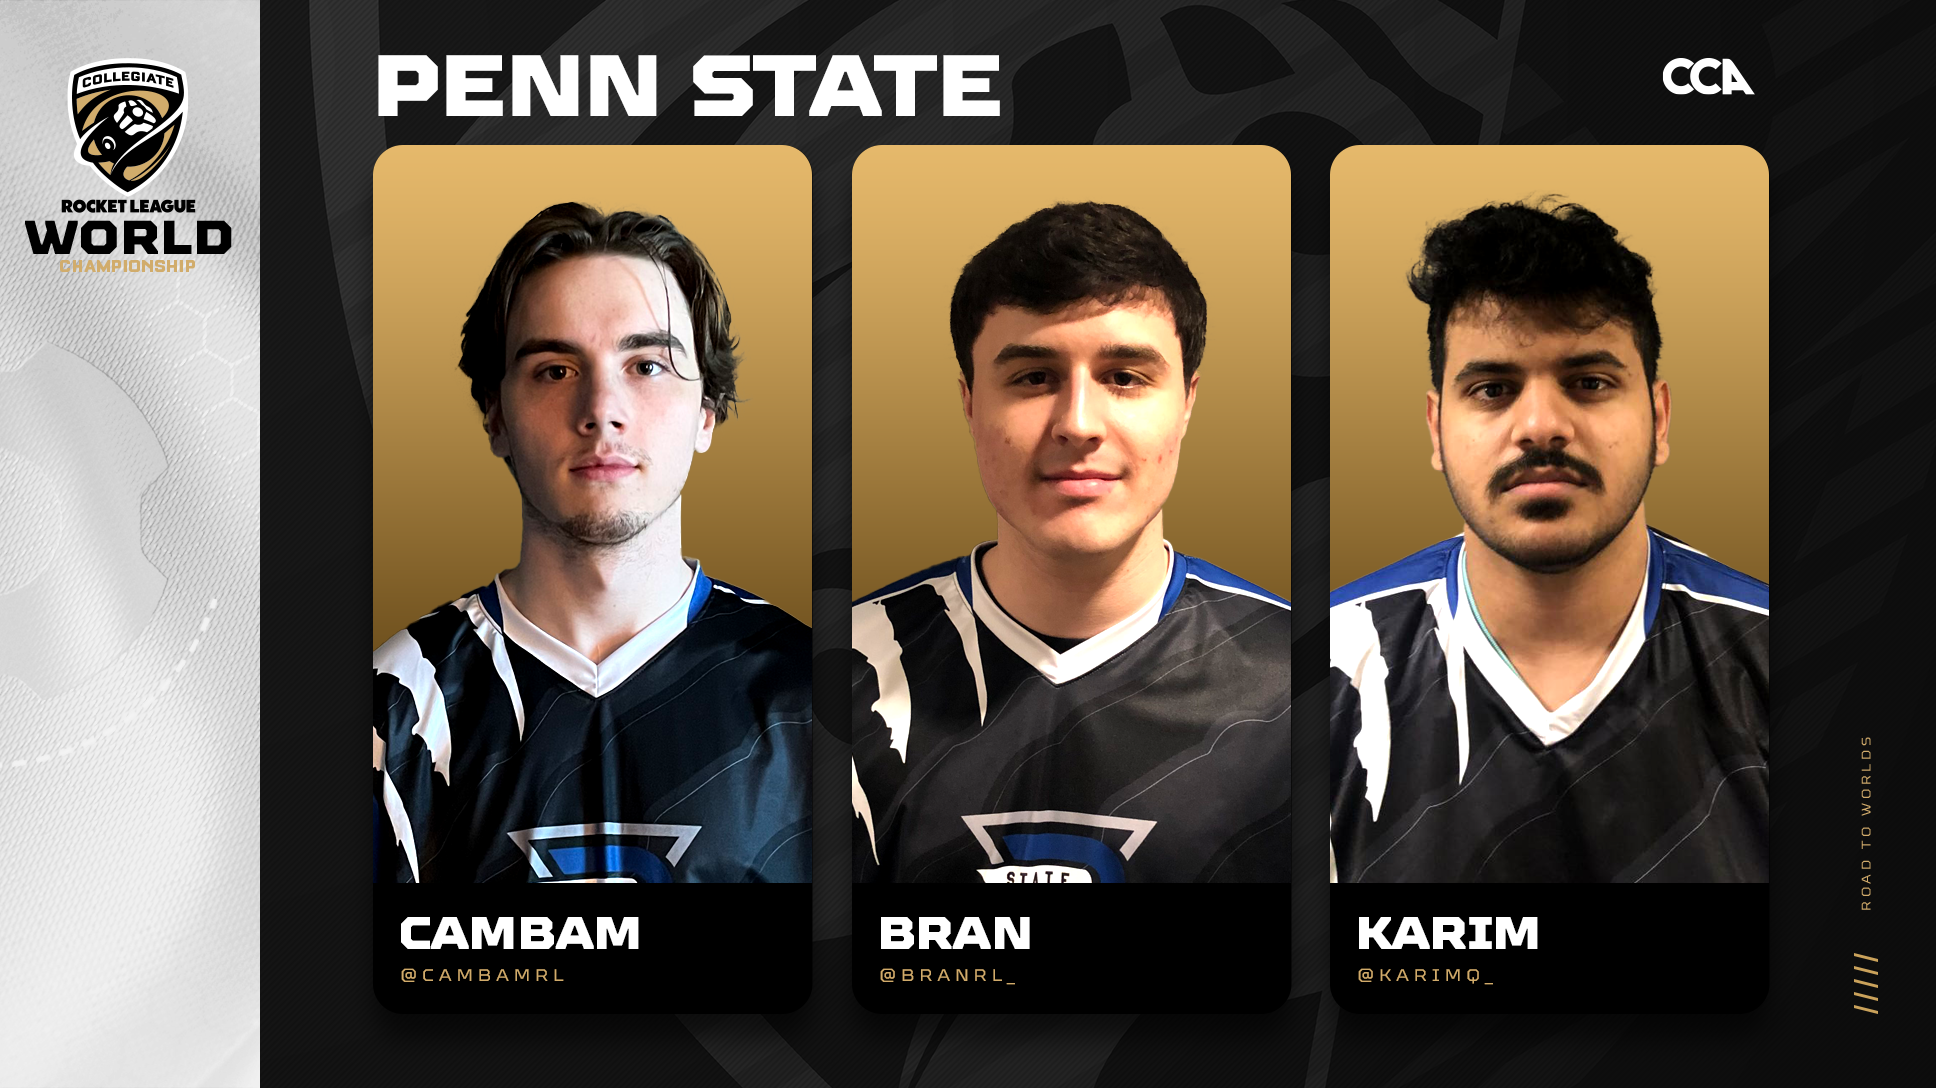 Penn State Road to Worlds header with images of Cambam, Bran, and Karim